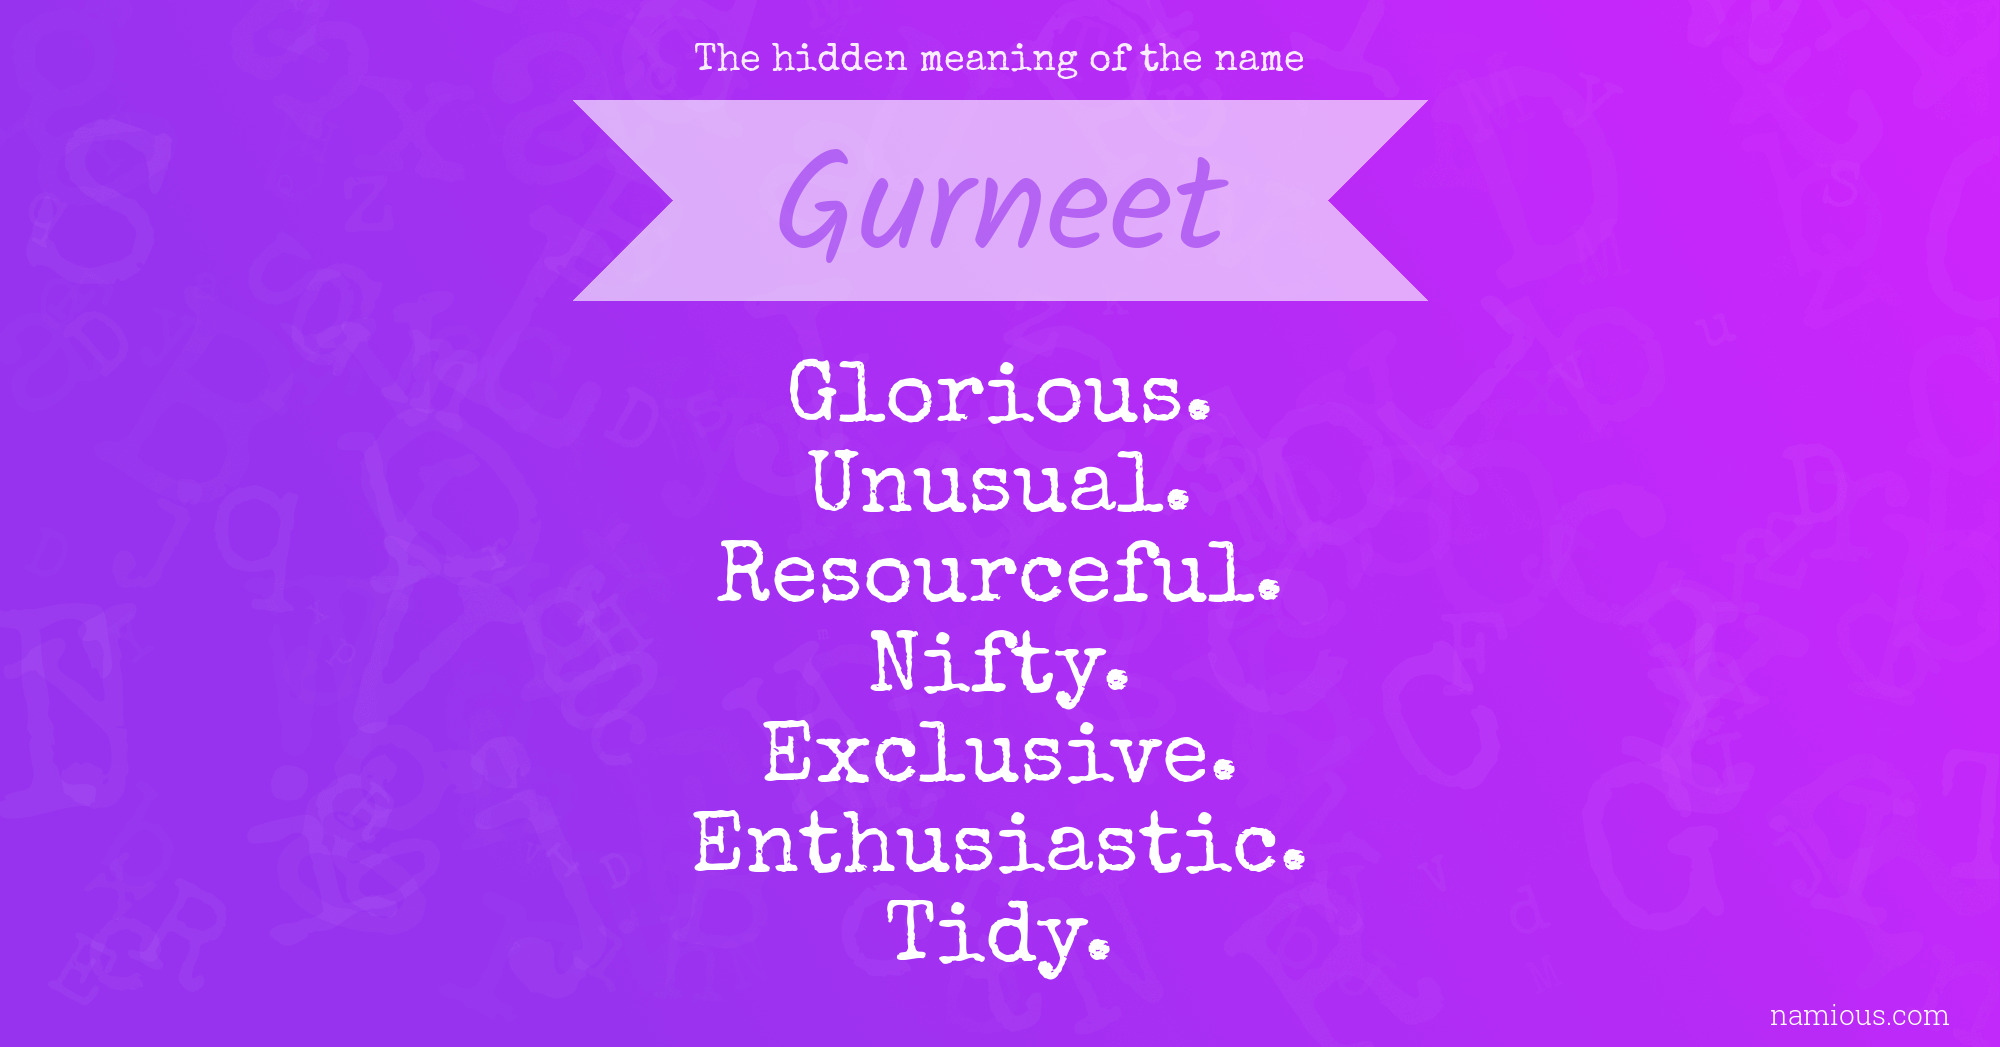 The hidden meaning of the name Gurneet